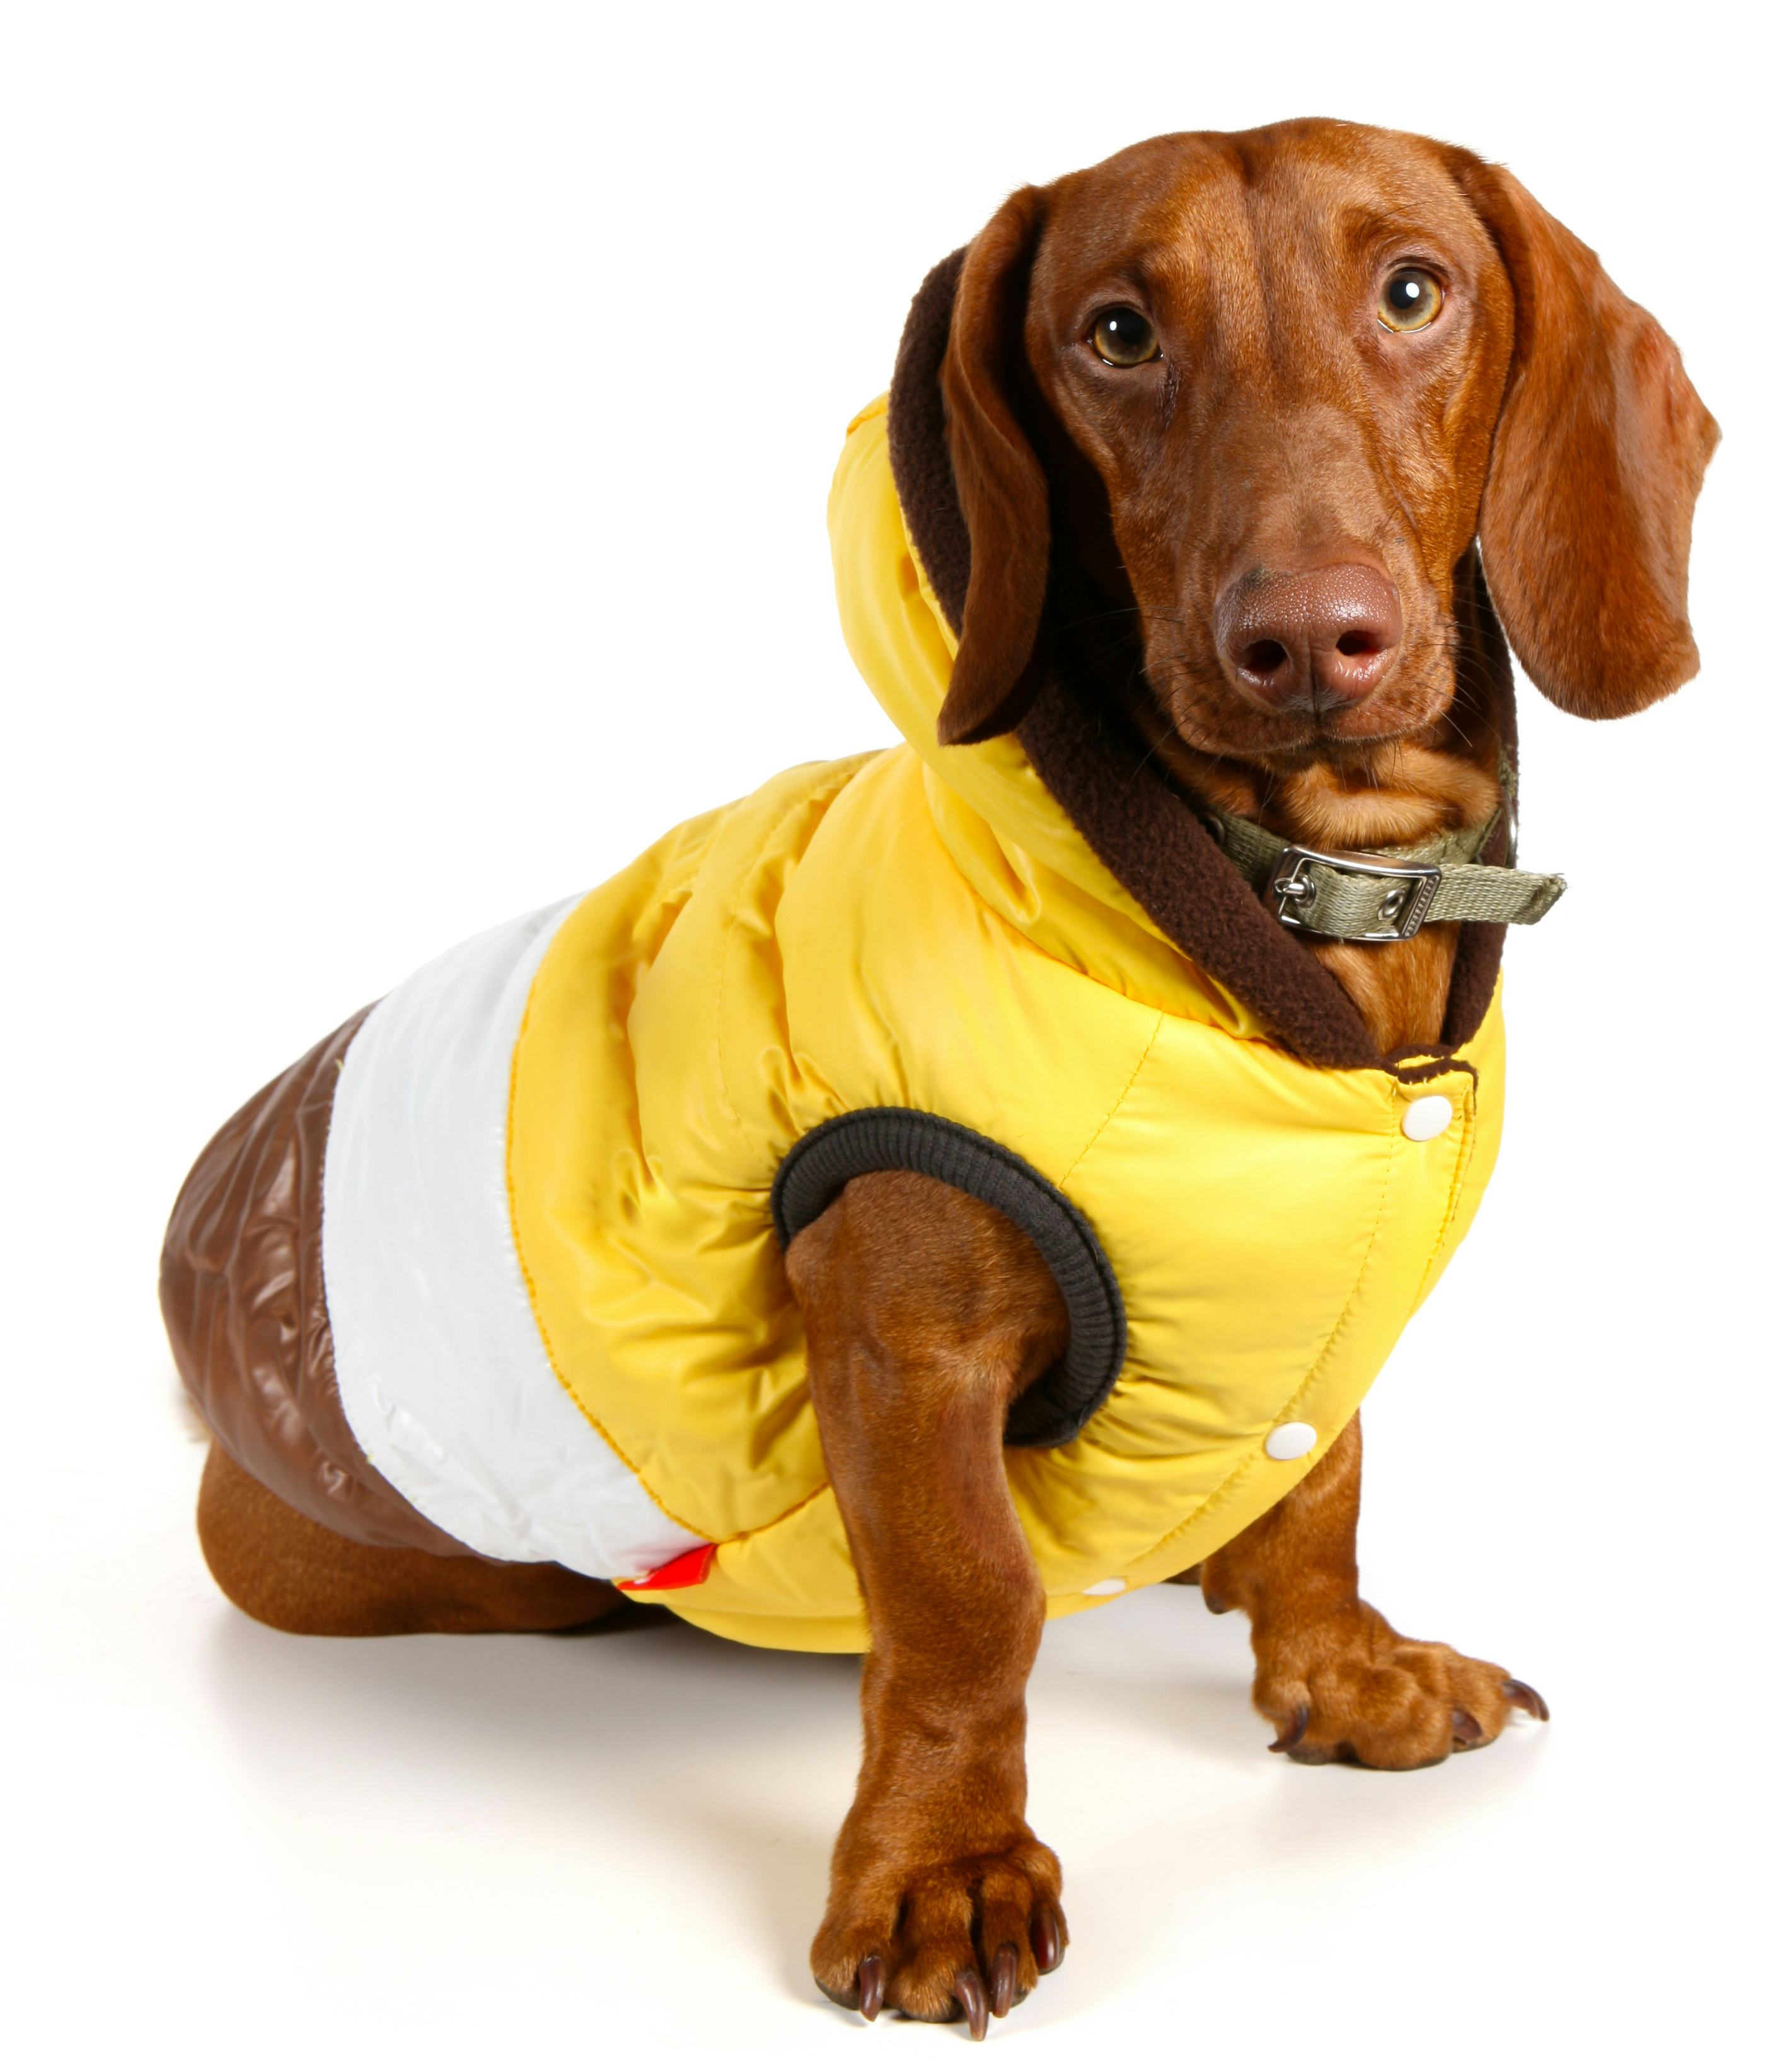 A cute dog in a yellow coat